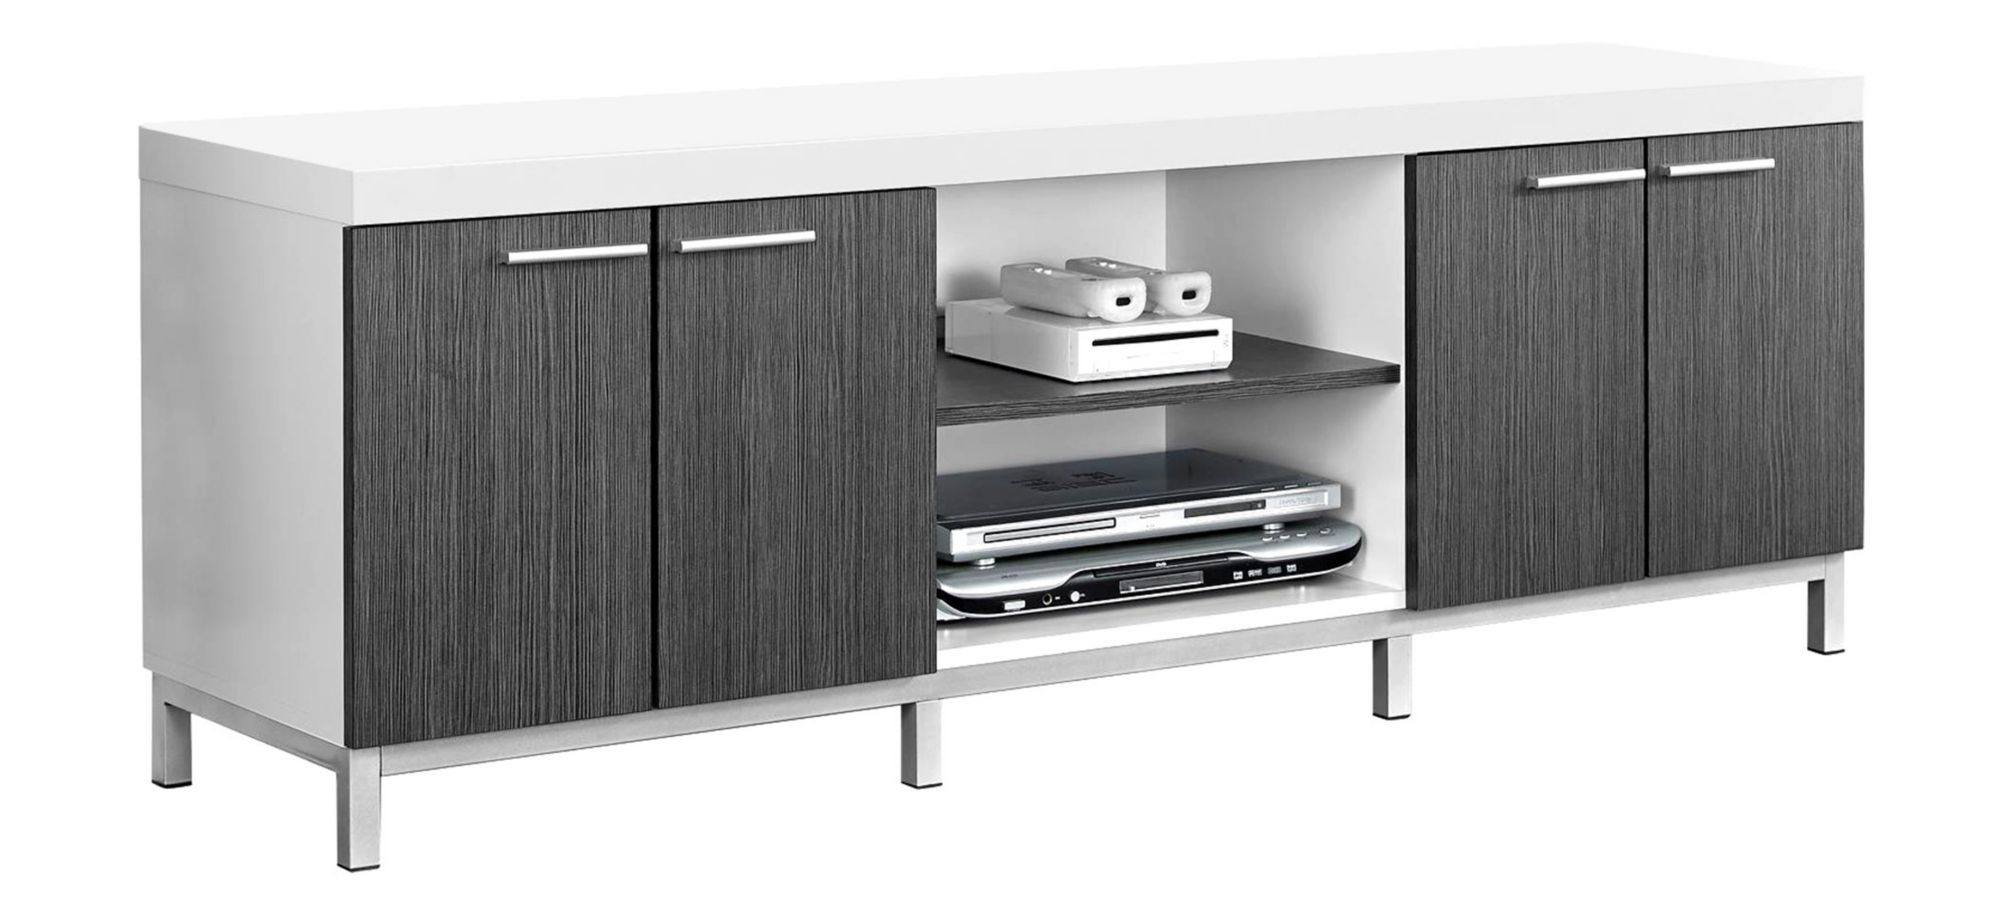 60" Monarch TV Stand in White by Monarch Specialties